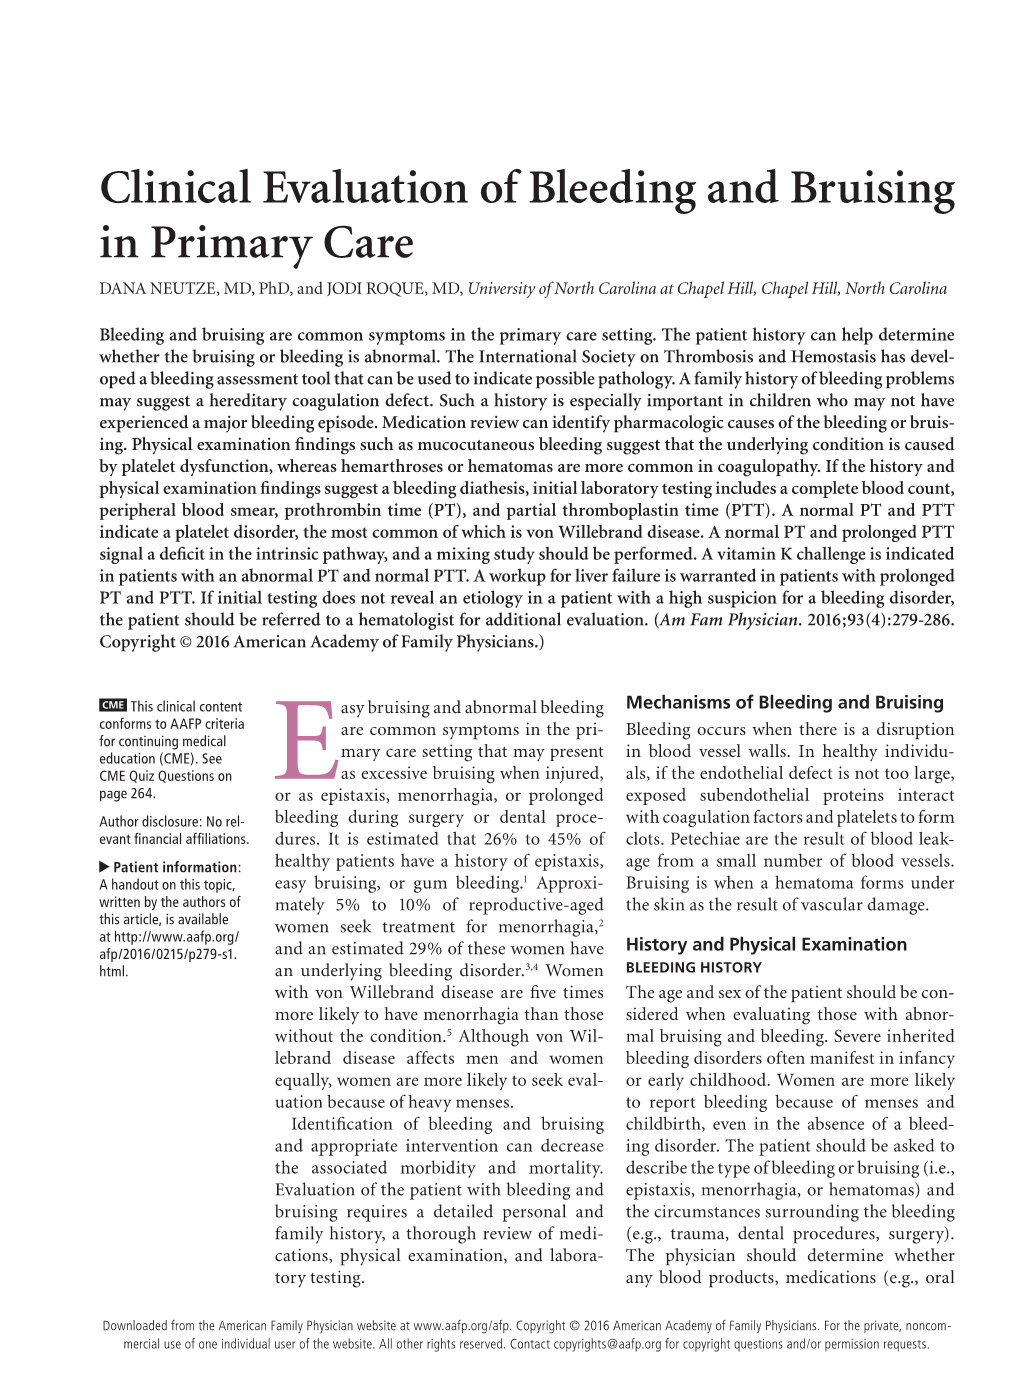 Clinical Evaluation of Bleeding and Bruising in Primary Care